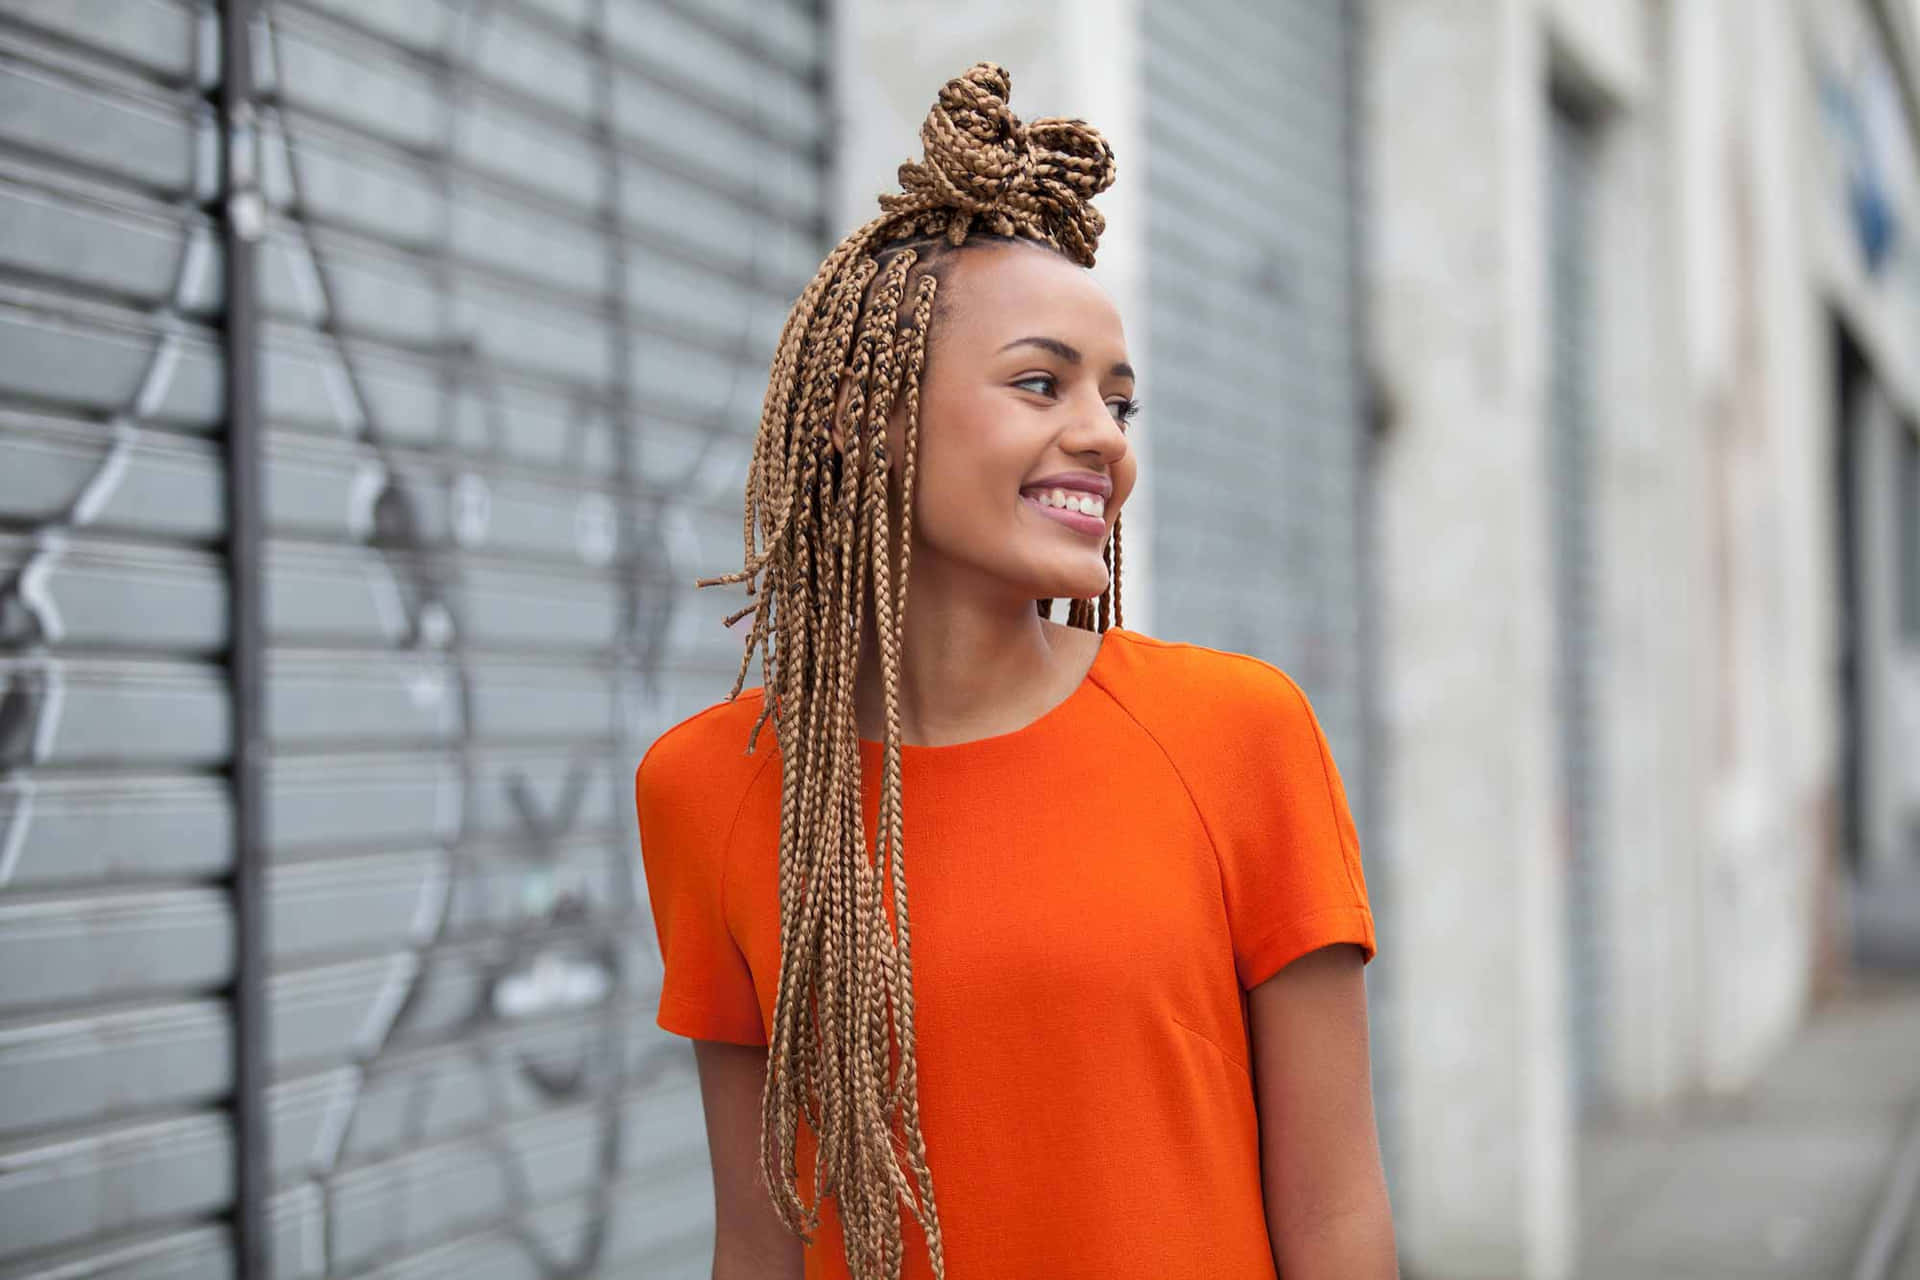 A Young Woman Wearing An Orange Dress And Braids